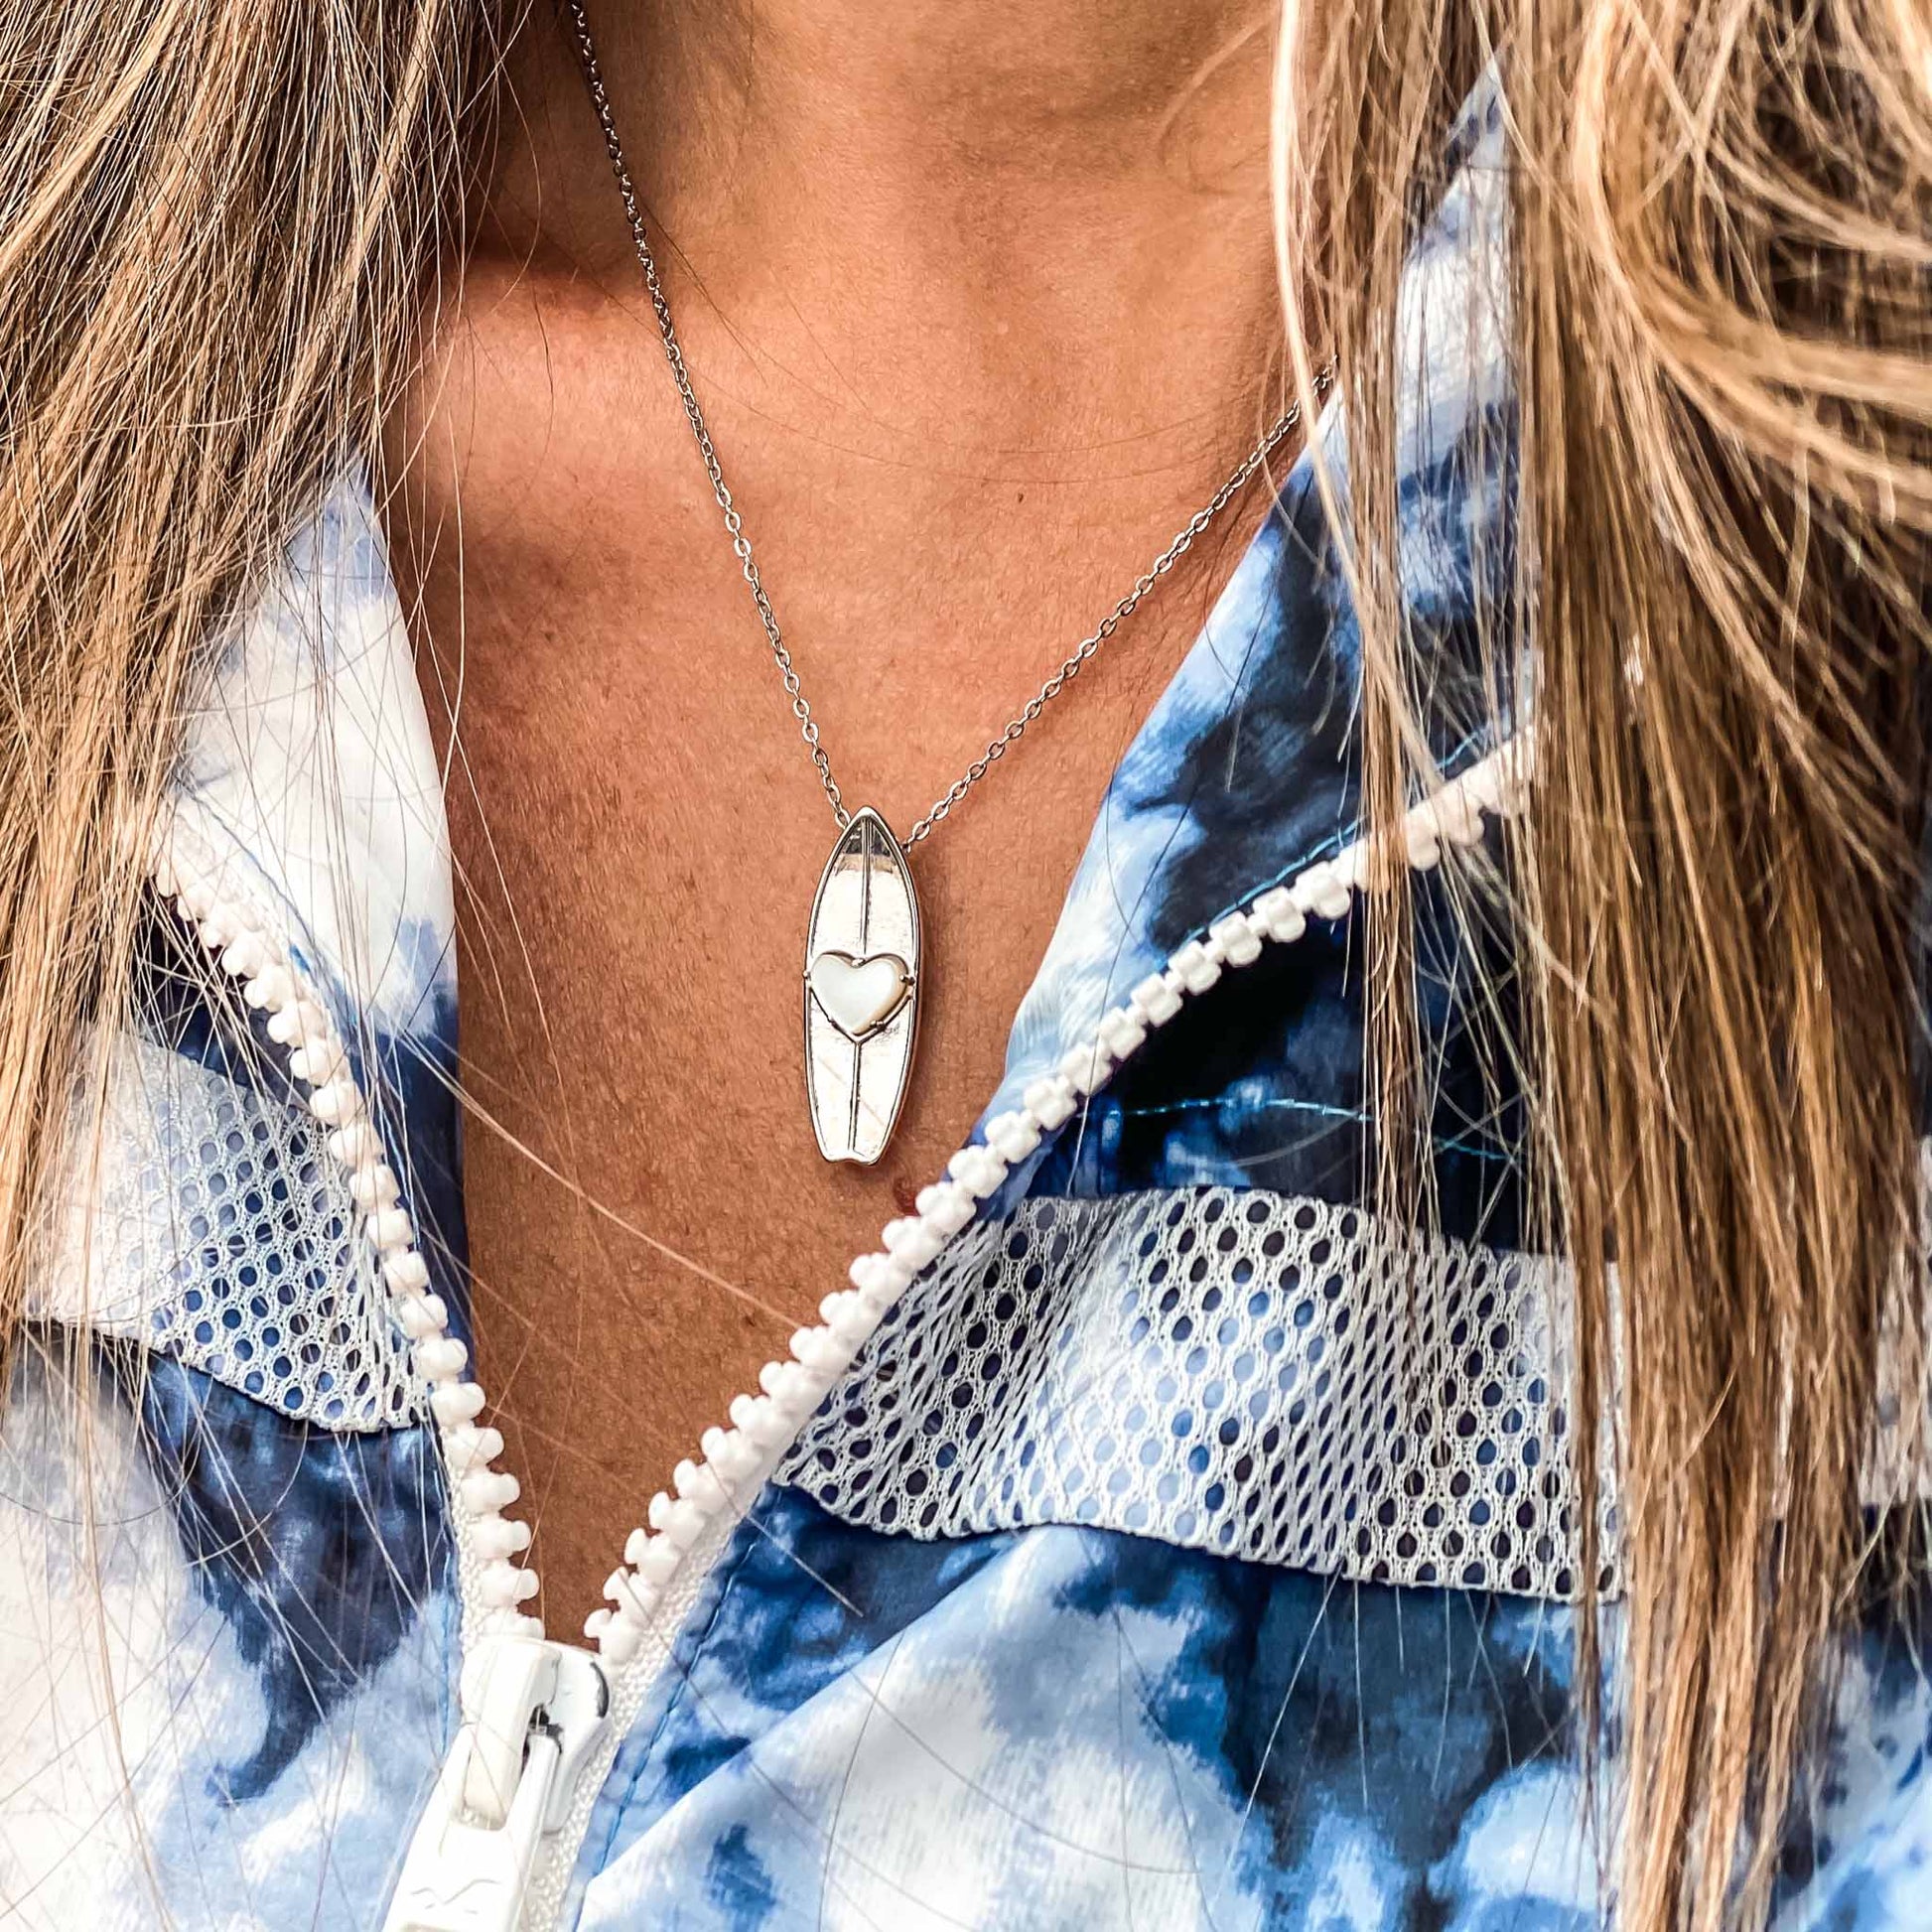 What's the surf forecast for today? While Surfline helps with the swell, wind & wave forecasts we help you show off your passion for surfing. Whether you're surfing or just checking the waves at Pipeline, take your surfboard, always. Shop the June birthstone surf jewelry online or at a surf shop near you.